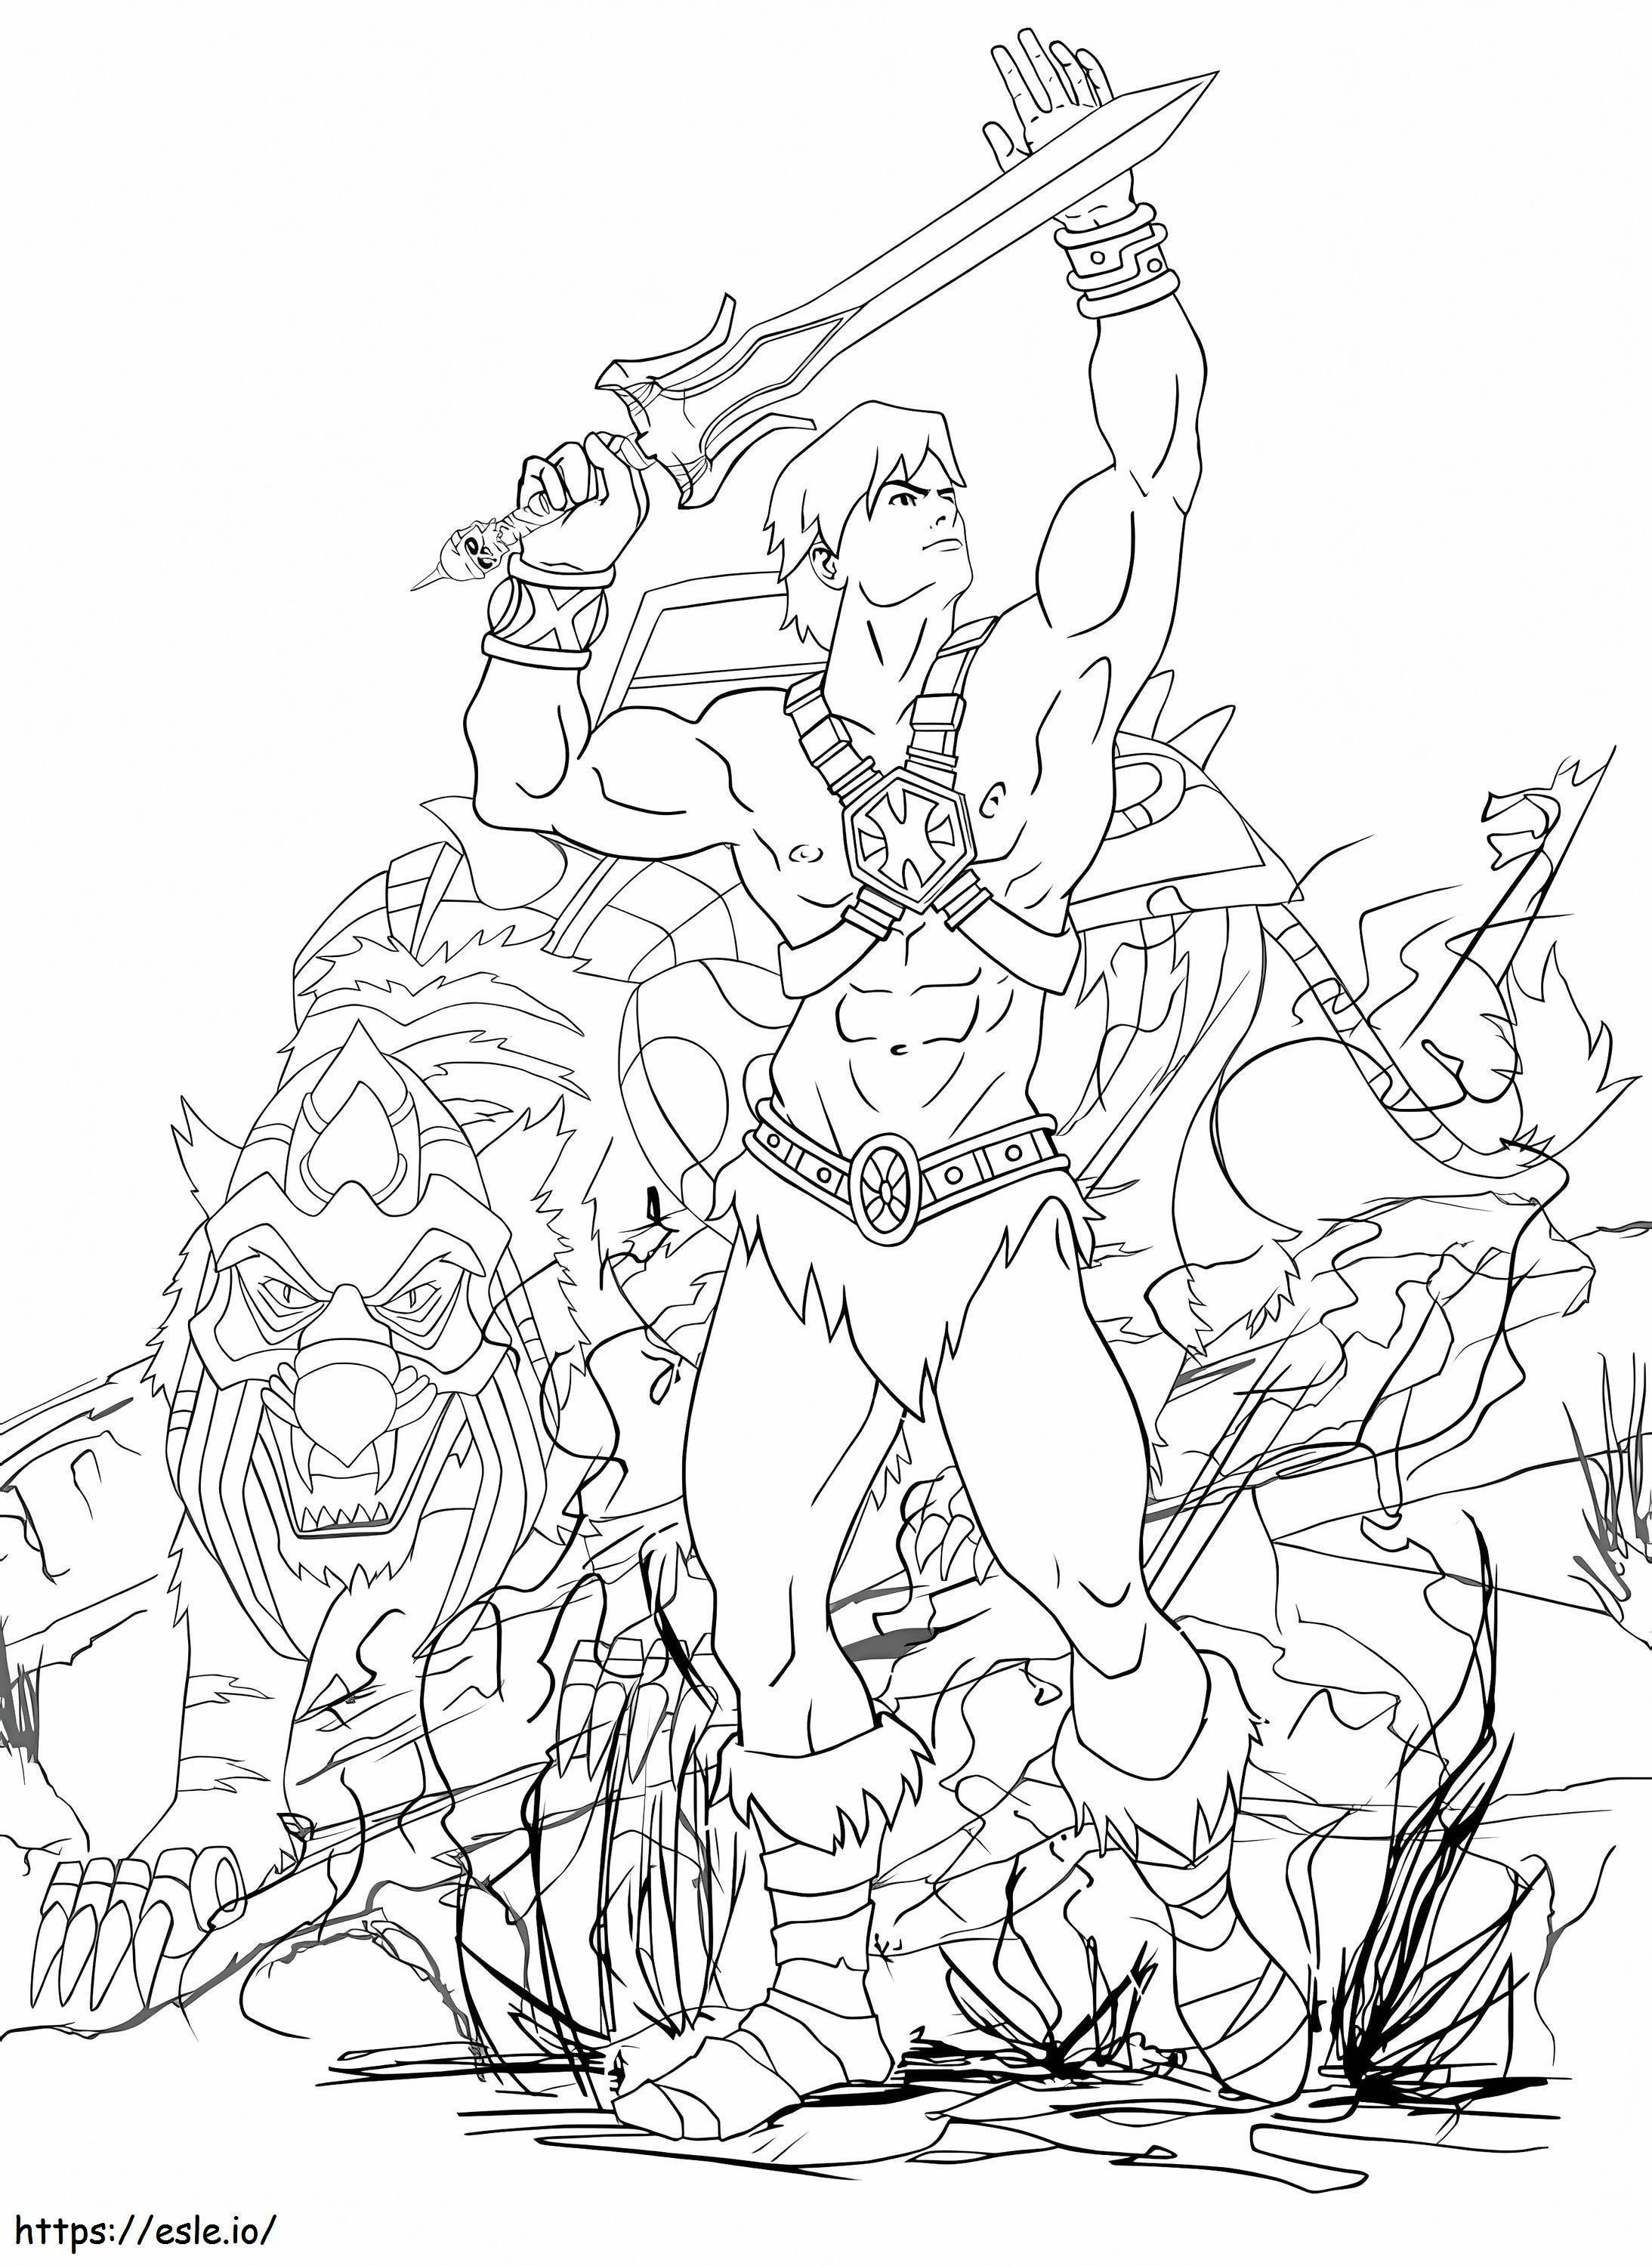 He Man 3 coloring page